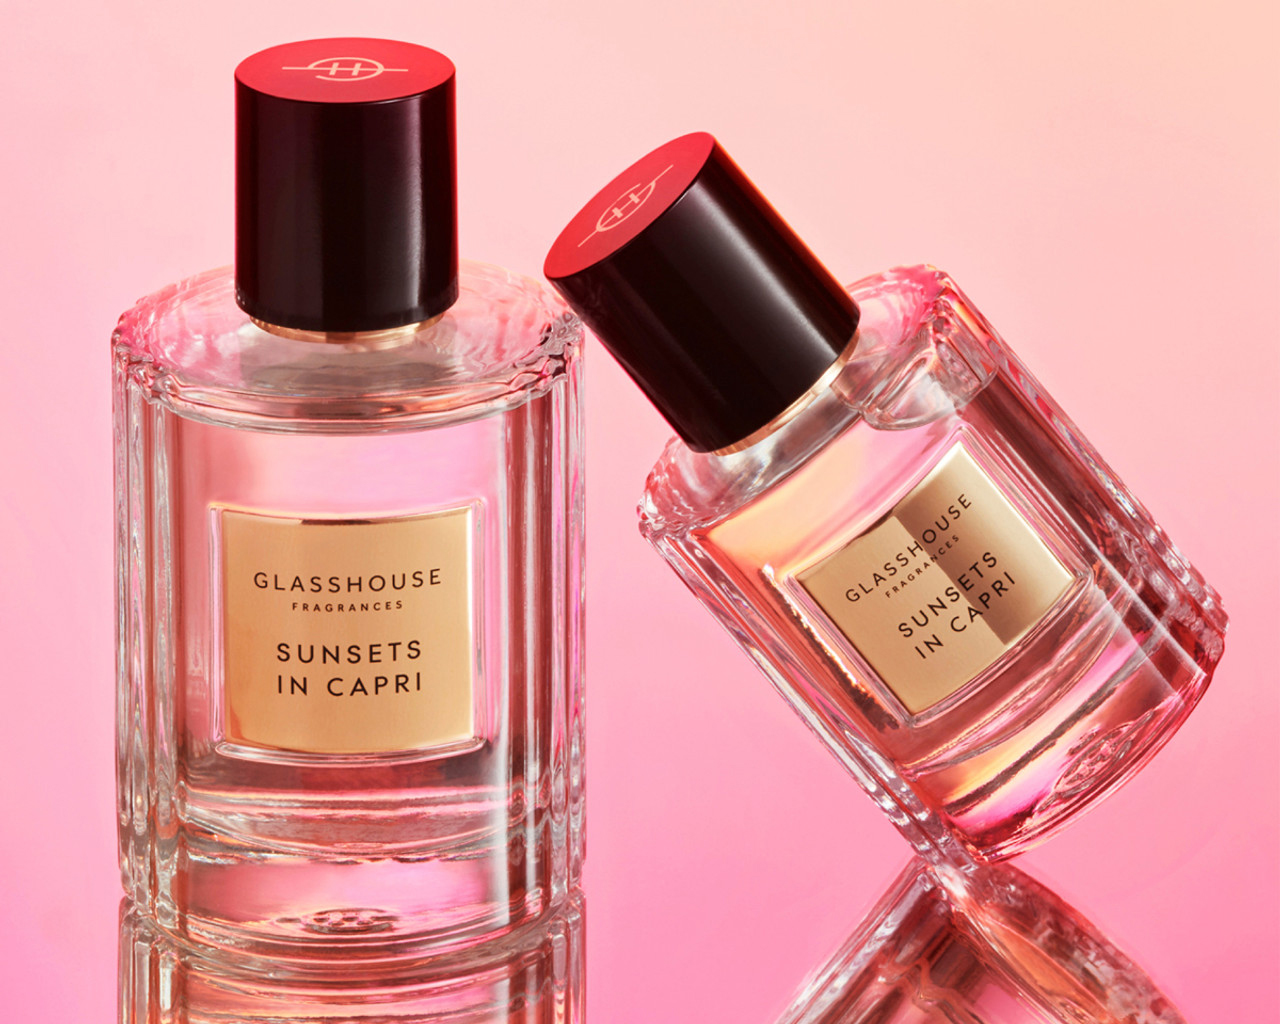 Two glass bottles of perfume with gold labels with 'Sunsets in Capri' against a pink backdrop.